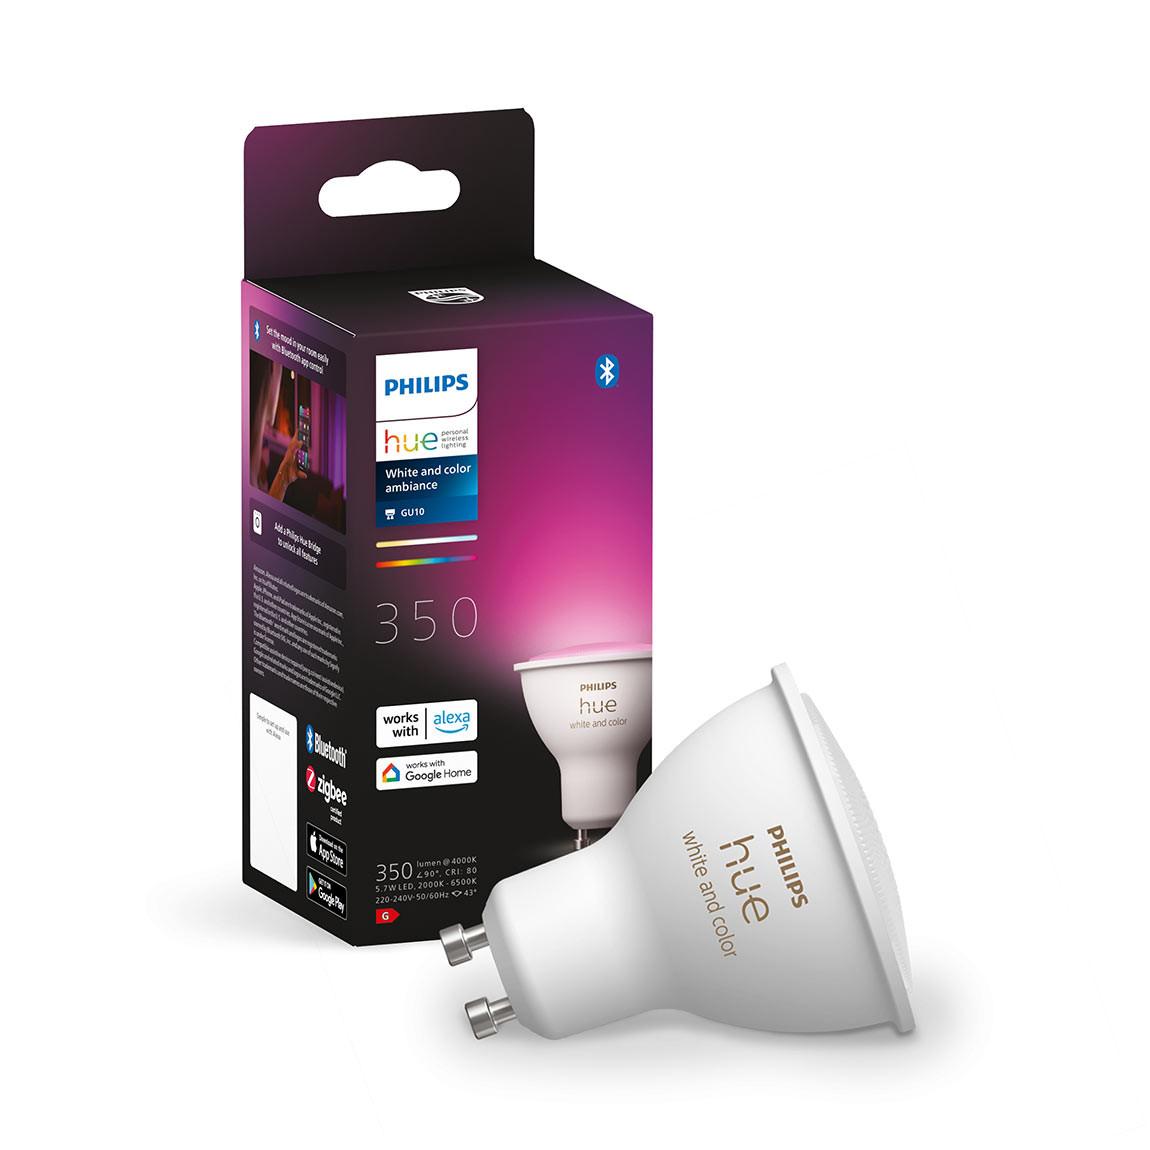 Philips Hue White & Color Ambiance GU10 Bluetooth 4er-Set_Verpackung